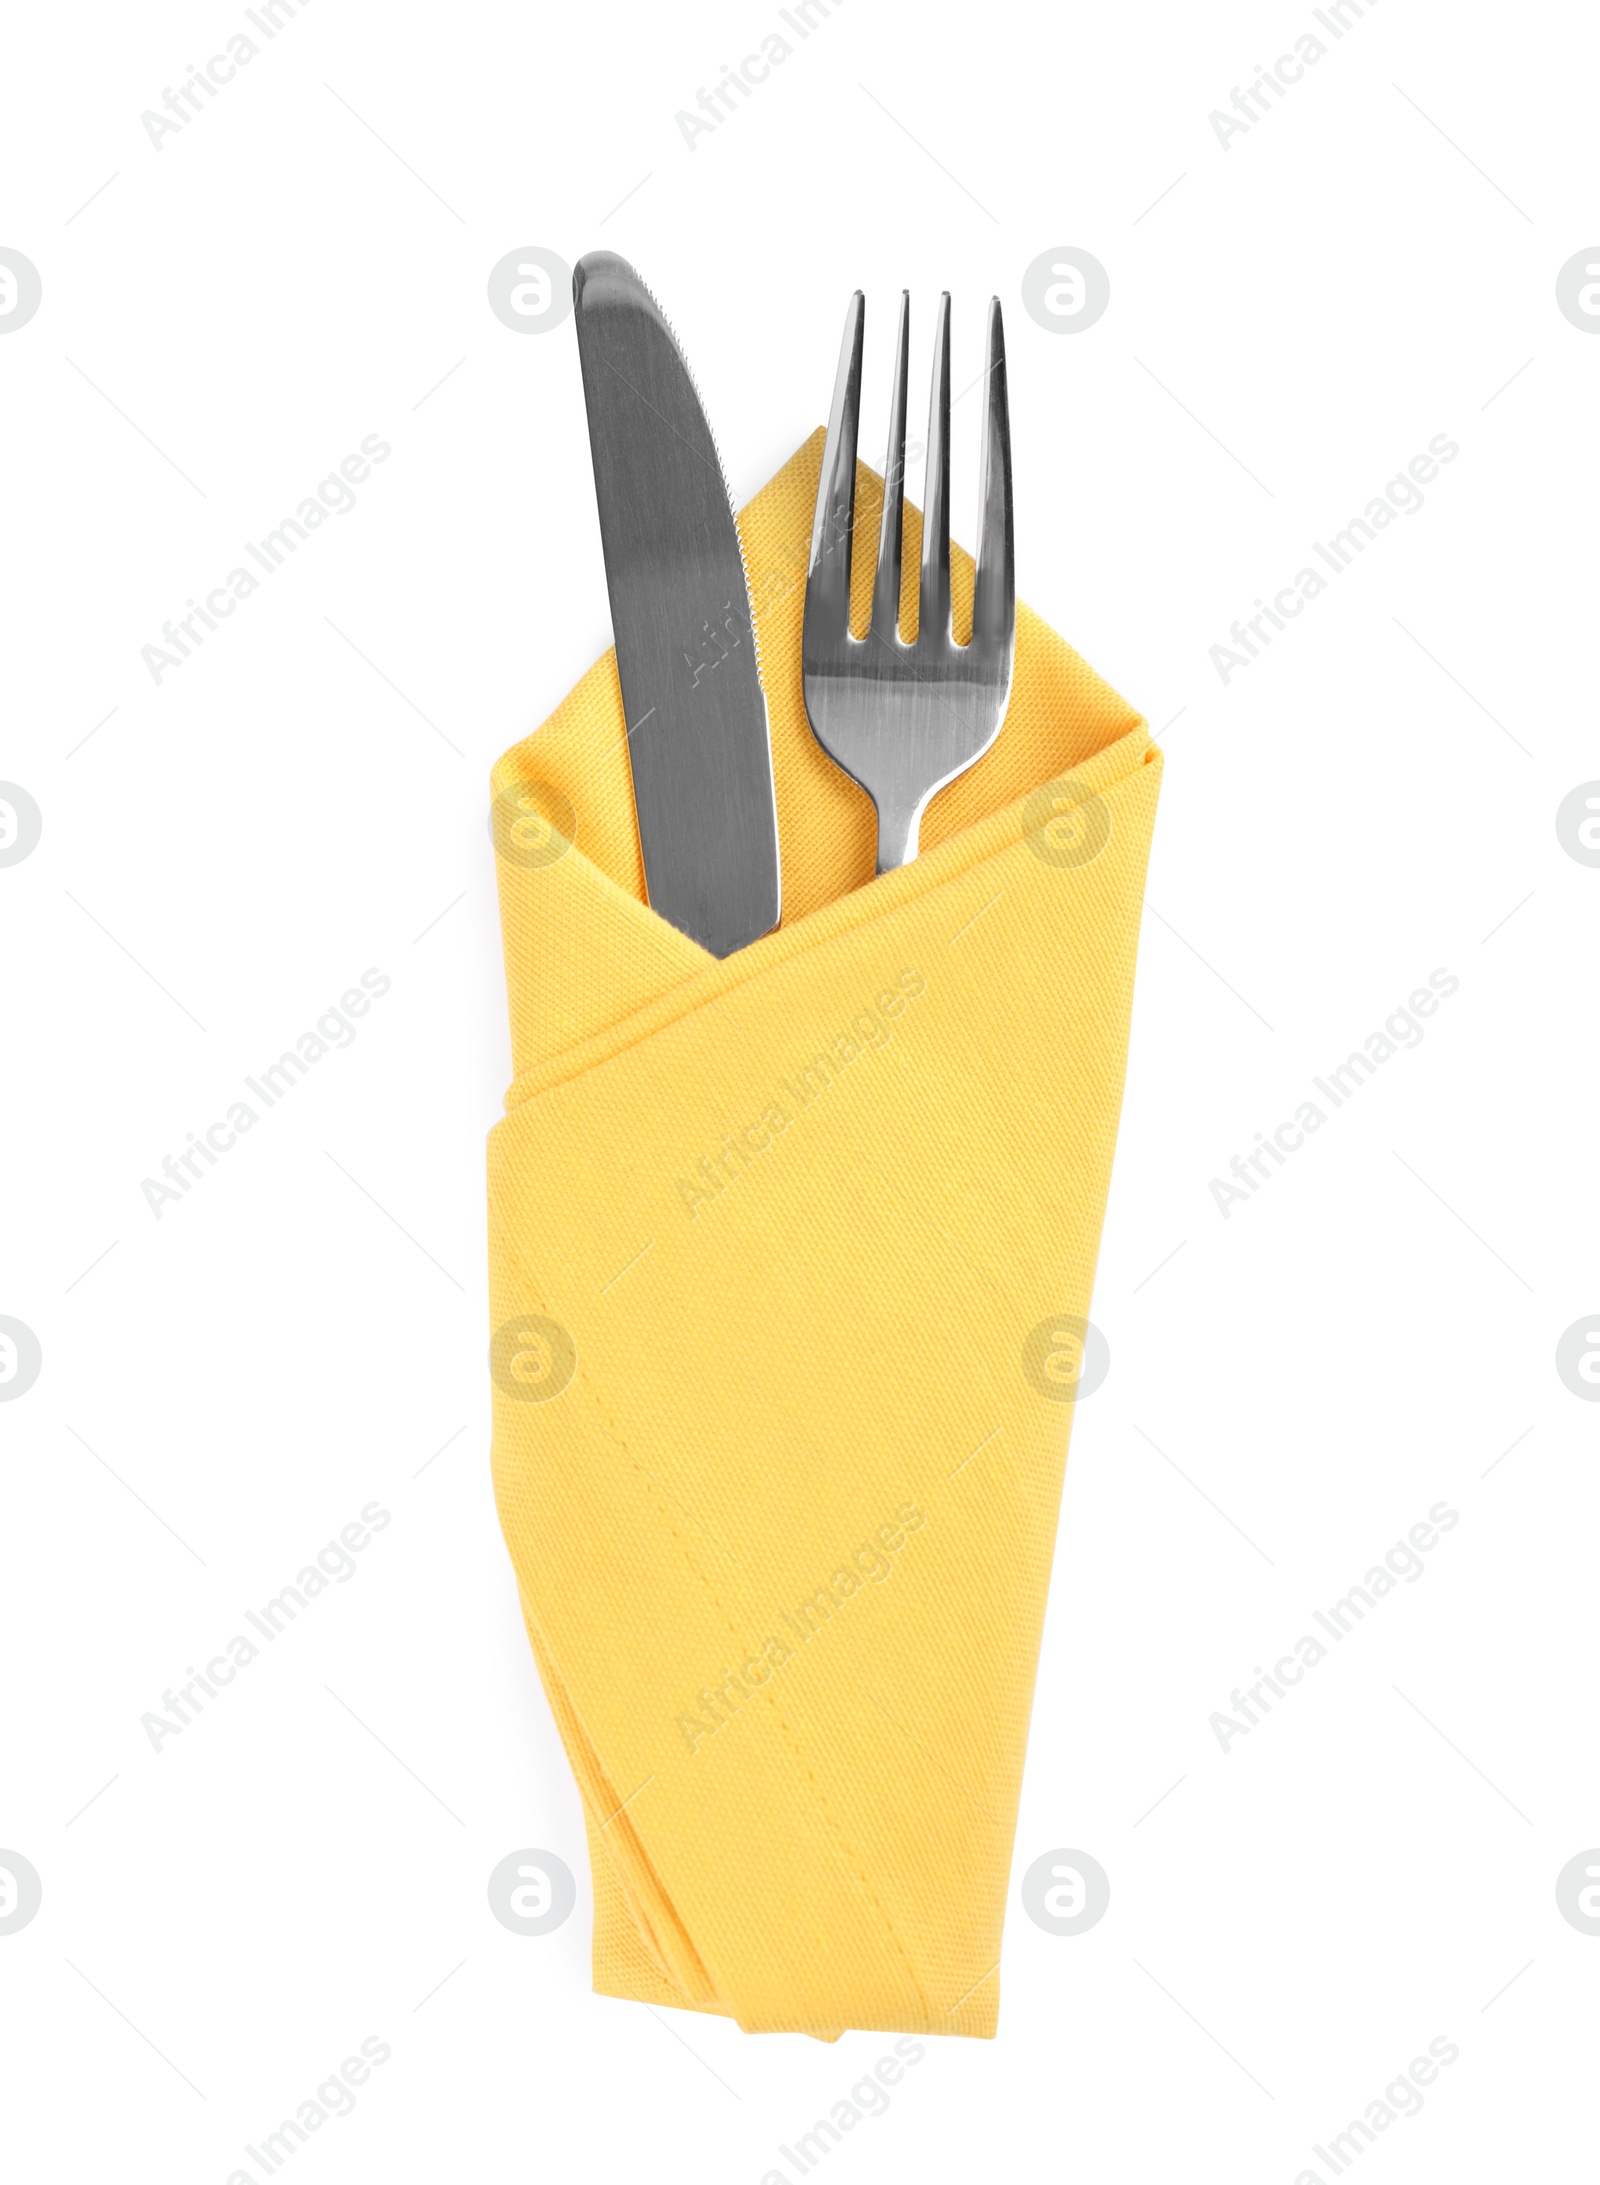 Photo of Fork and knife wrapped in yellow napkin on white background, top view